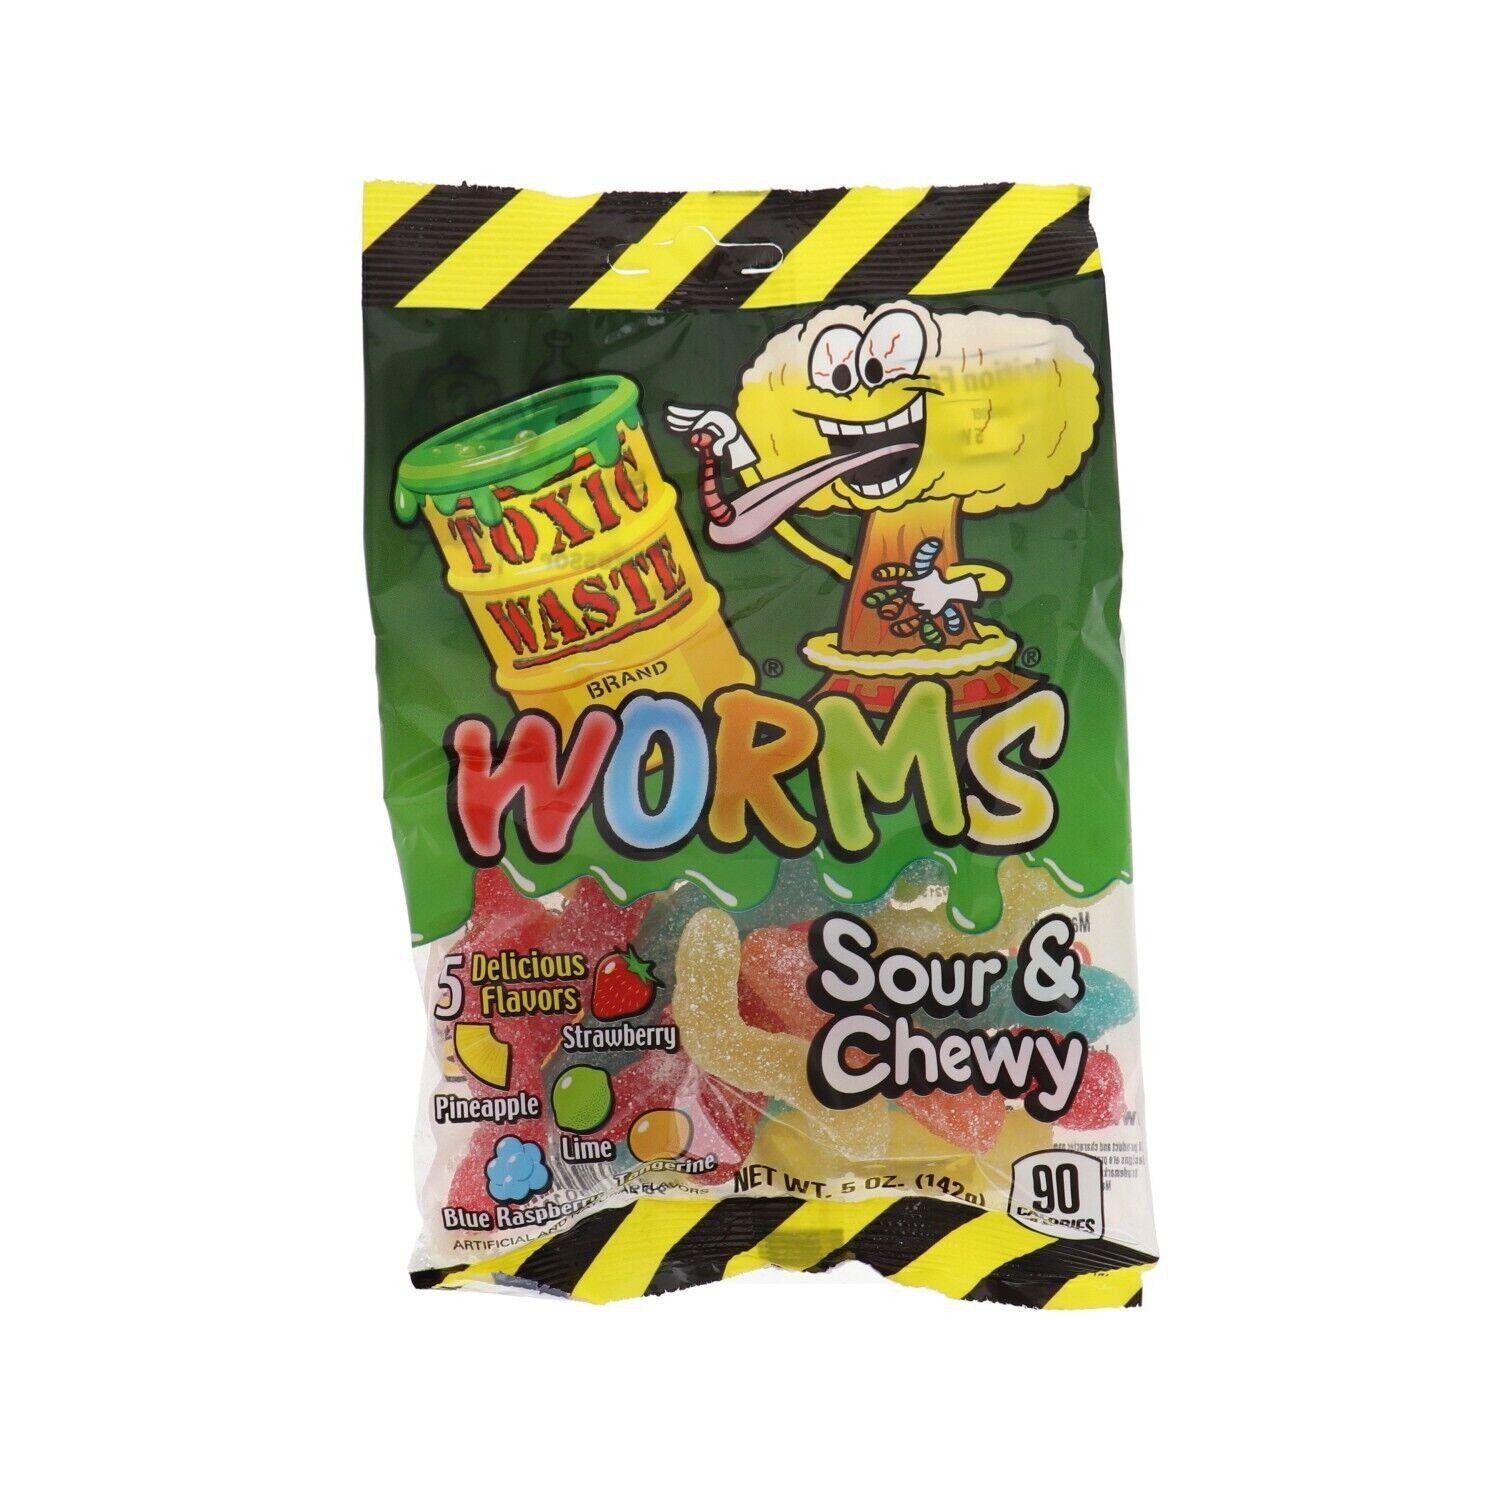 Toxic Waste Peg Worm Sour Chewy Candy